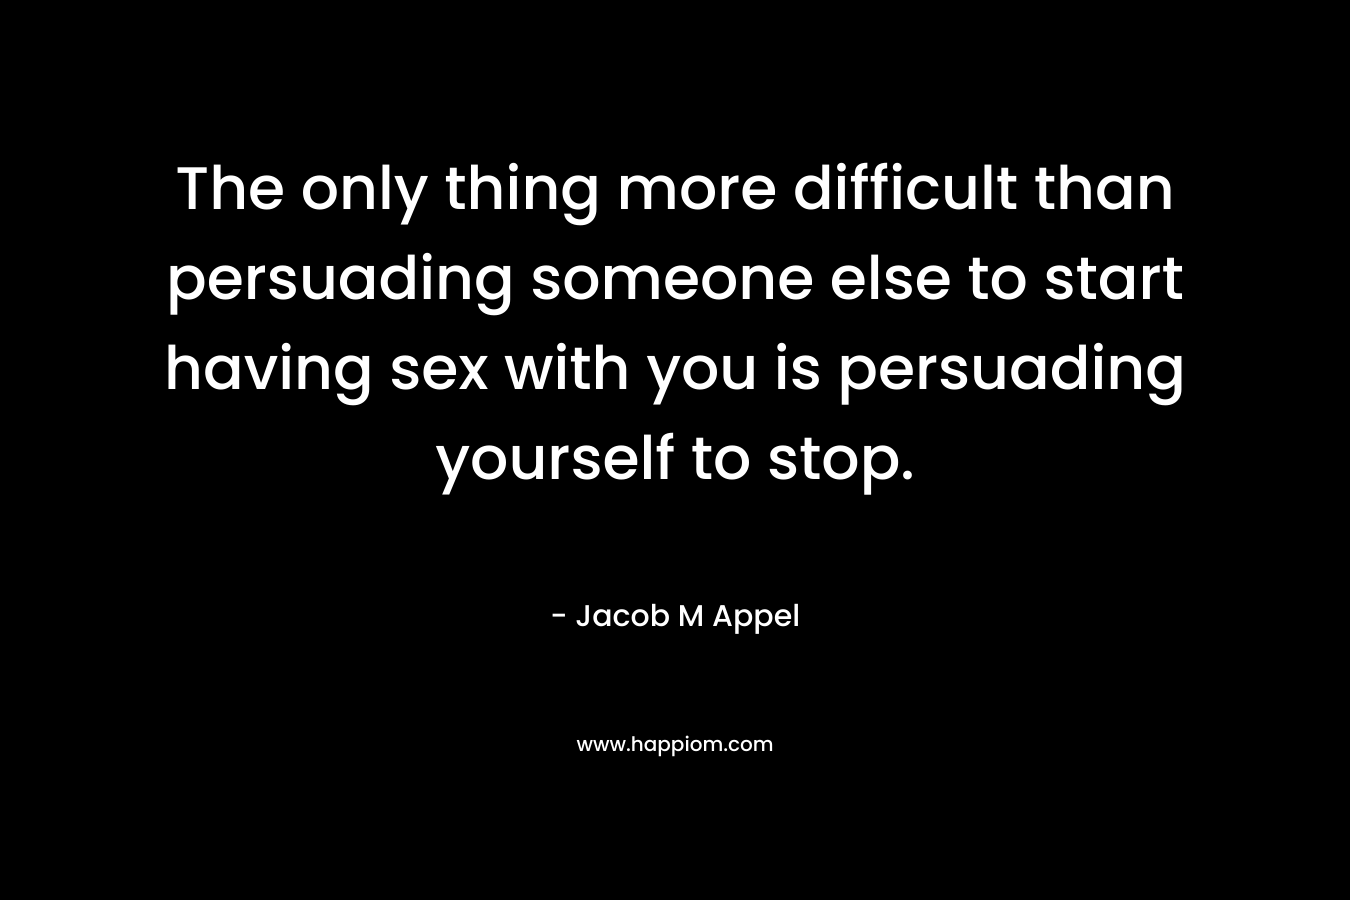 The only thing more difficult than persuading someone else to start having sex with you is persuading yourself to stop. – Jacob M Appel